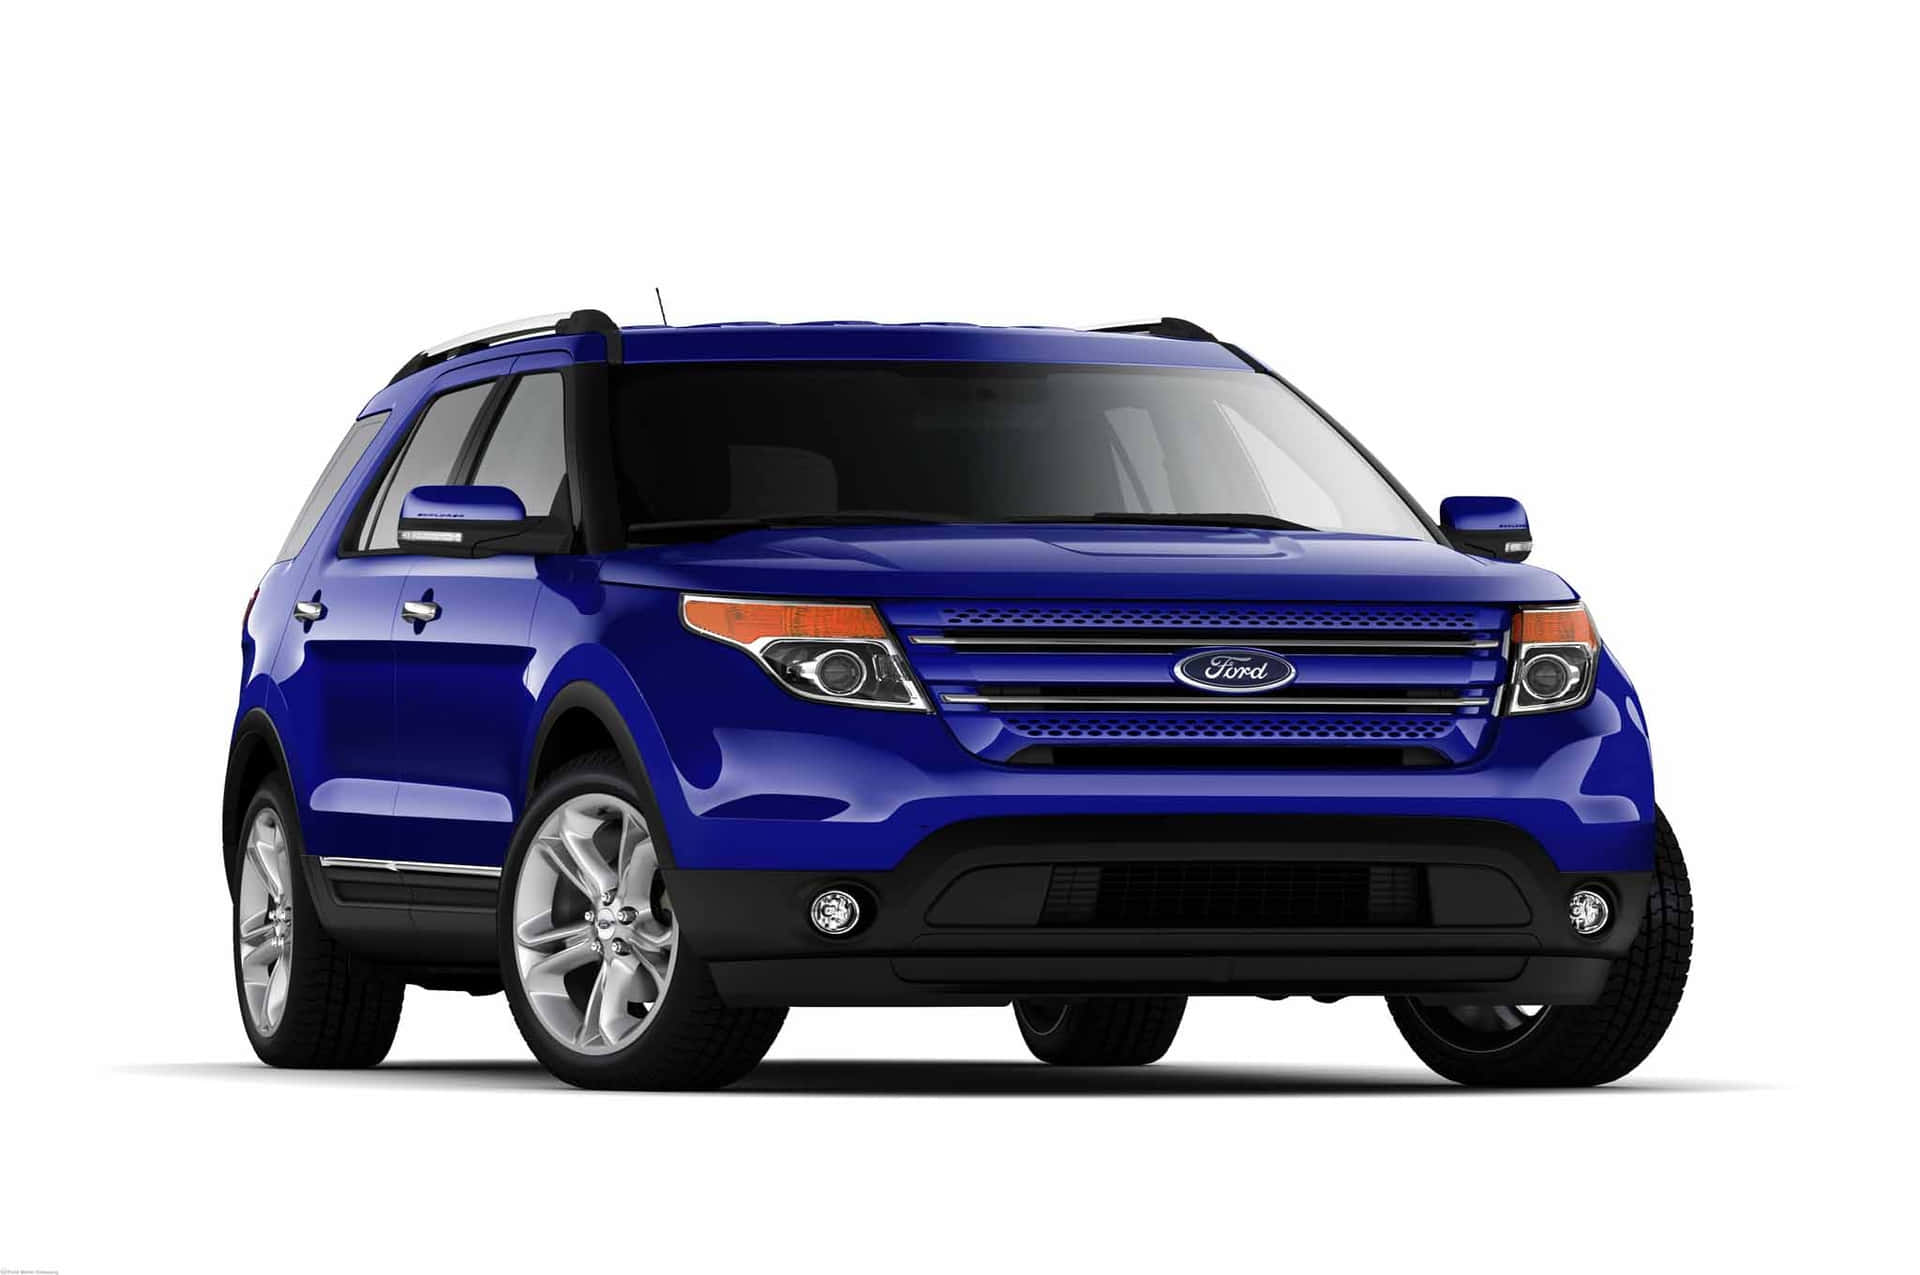 Caption: Ford Explorer - The Ultimate Adventure Vehicle Wallpaper